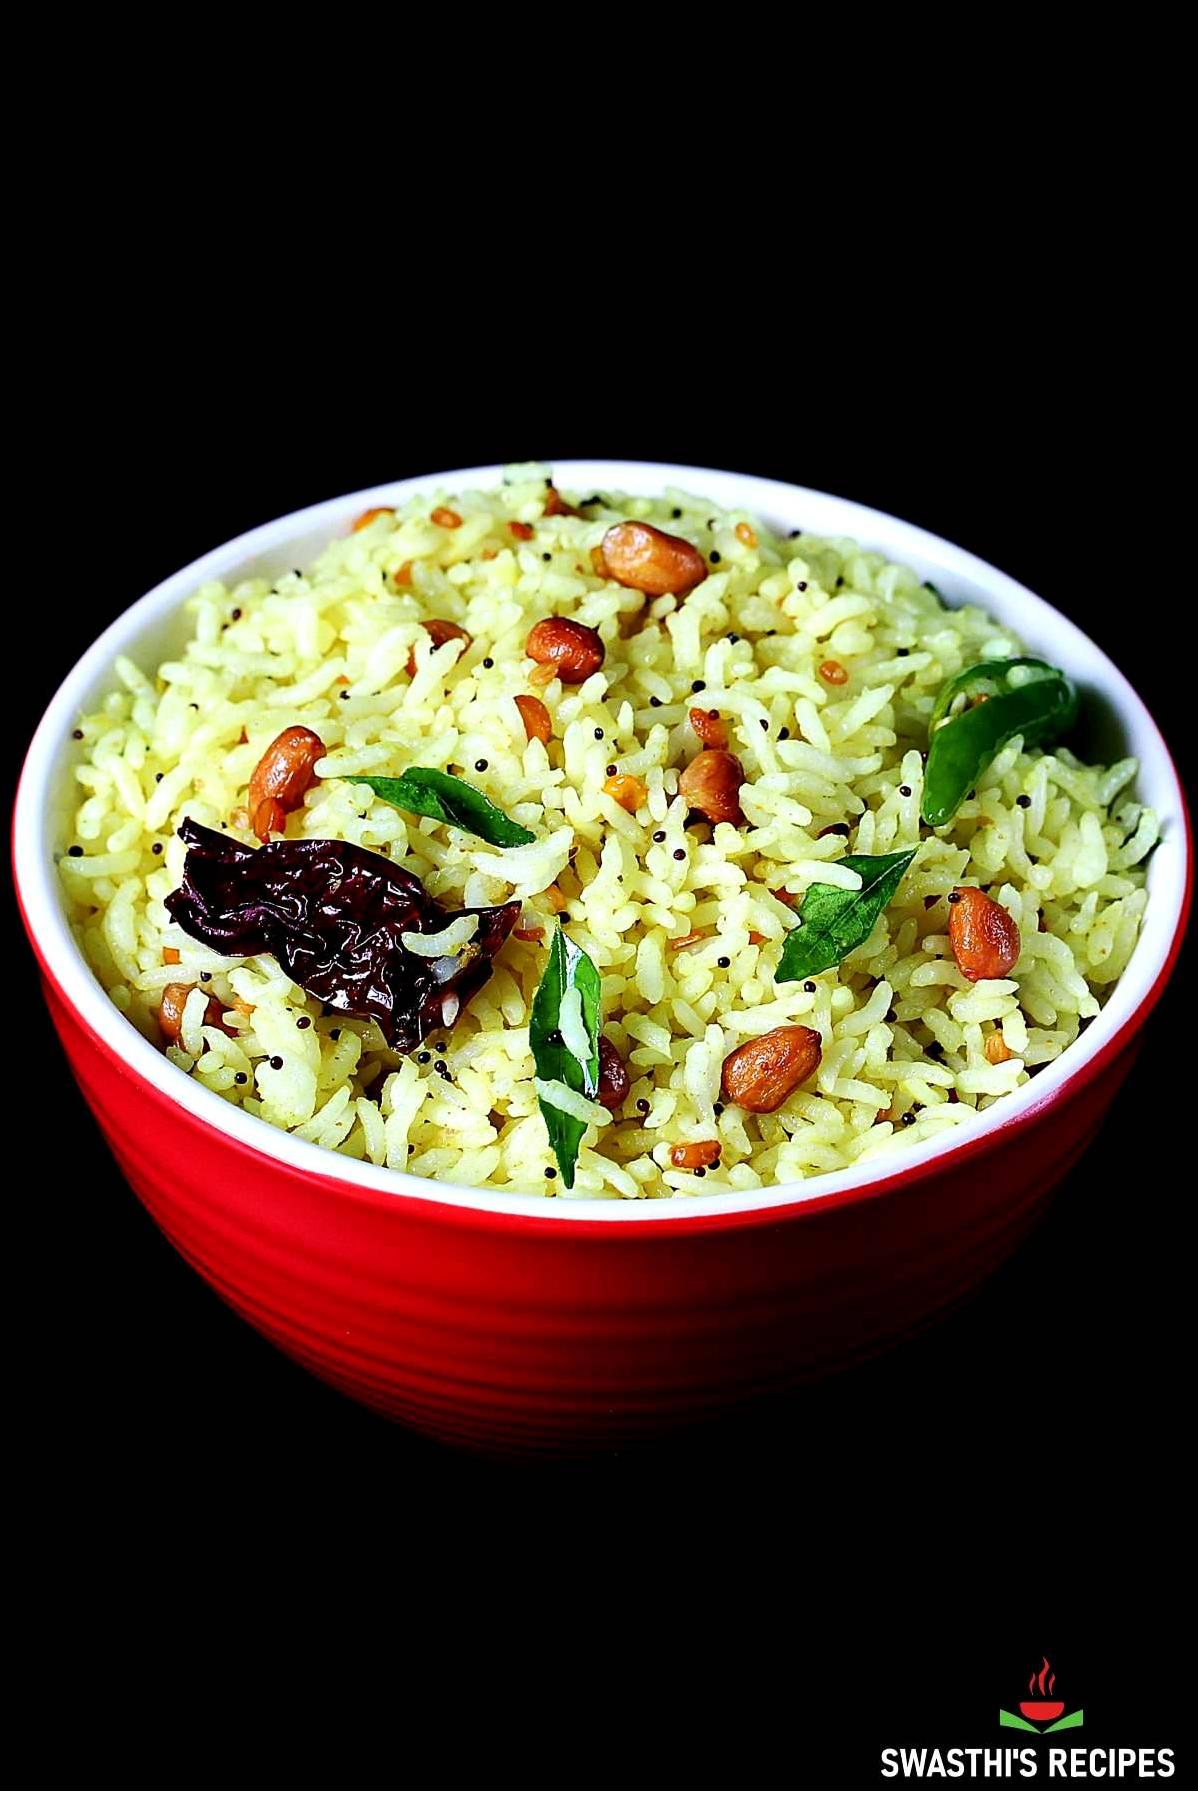 Delicious Lemon Rice Recipe to Tantalize Your Taste Buds